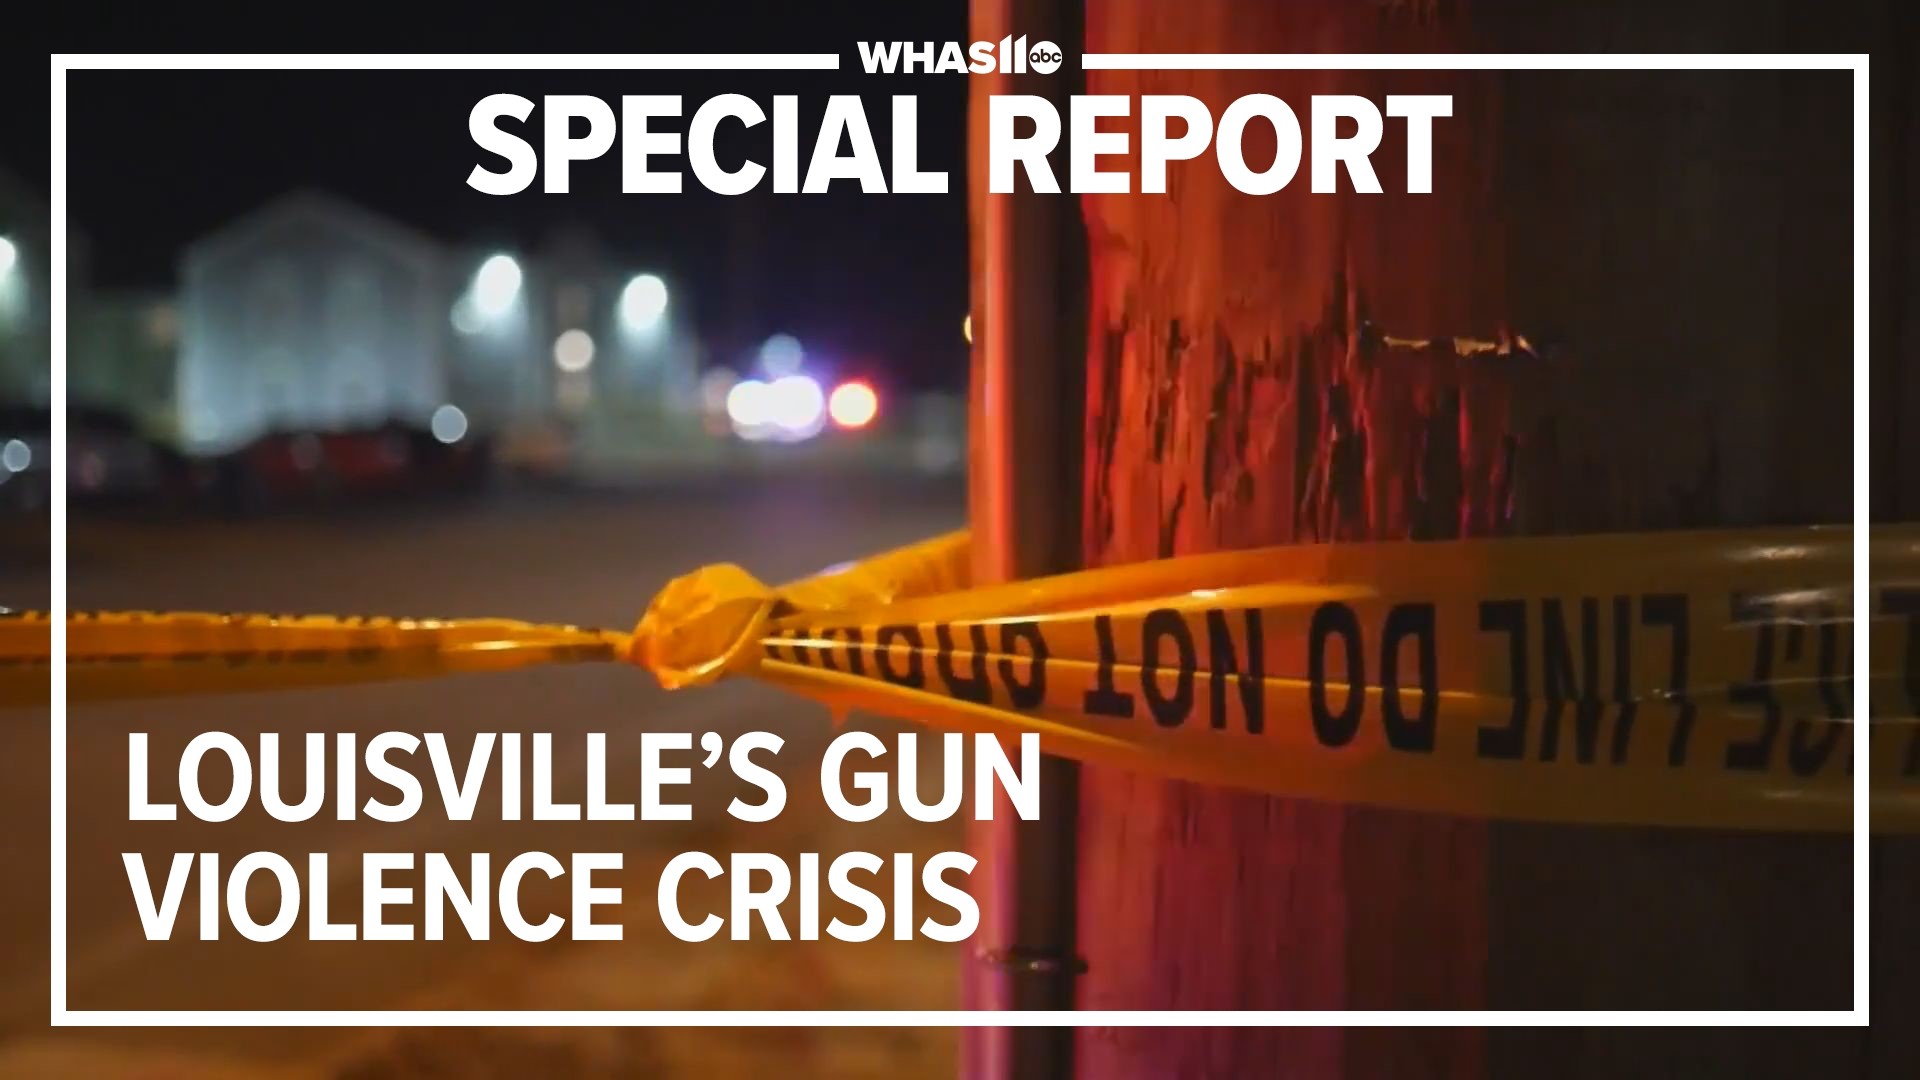 Gun violence is plaguing neighborhoods across the Metro. From the mayor's office to community leaders, officials are working to find a solution to the crisis.